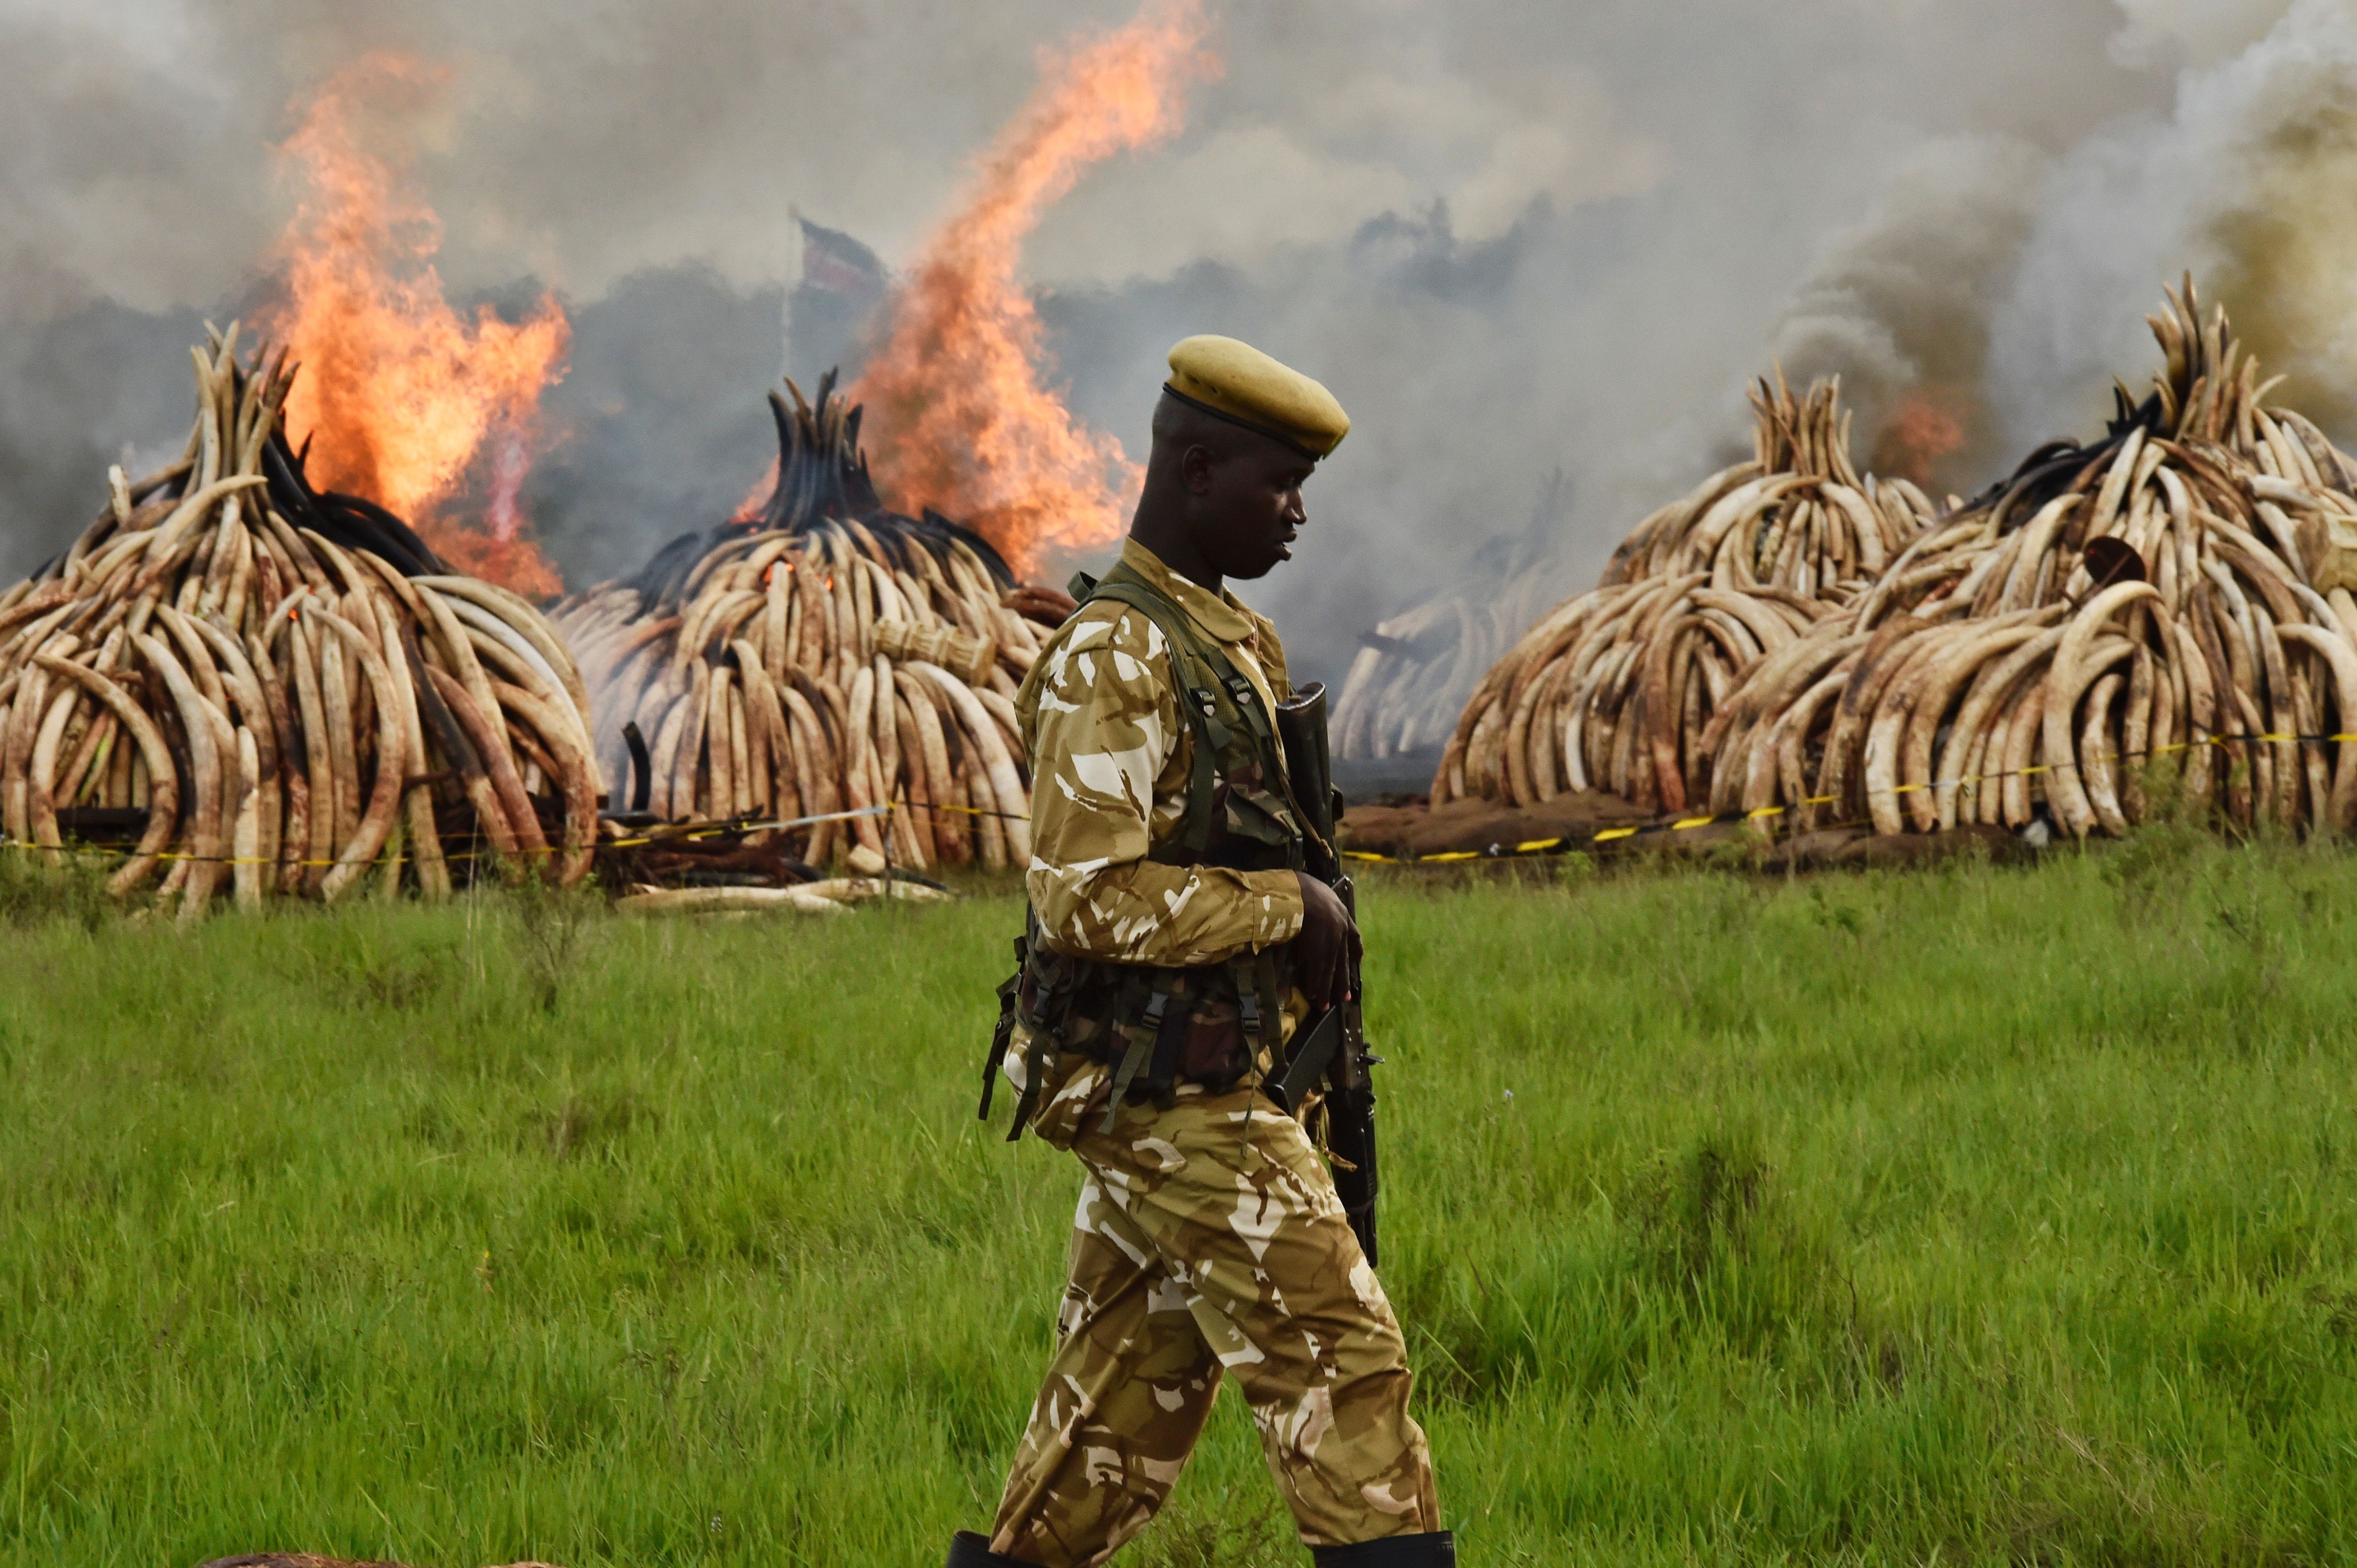 A Kenya Wildlife Services (KWS) ranger stands guard around illegal stockpiles of burning elephant tusks, ivory figurines and rhinoceros horns at the Nairobi National Park in April 2016. (Carl de Souza—AFP/Getty Images)